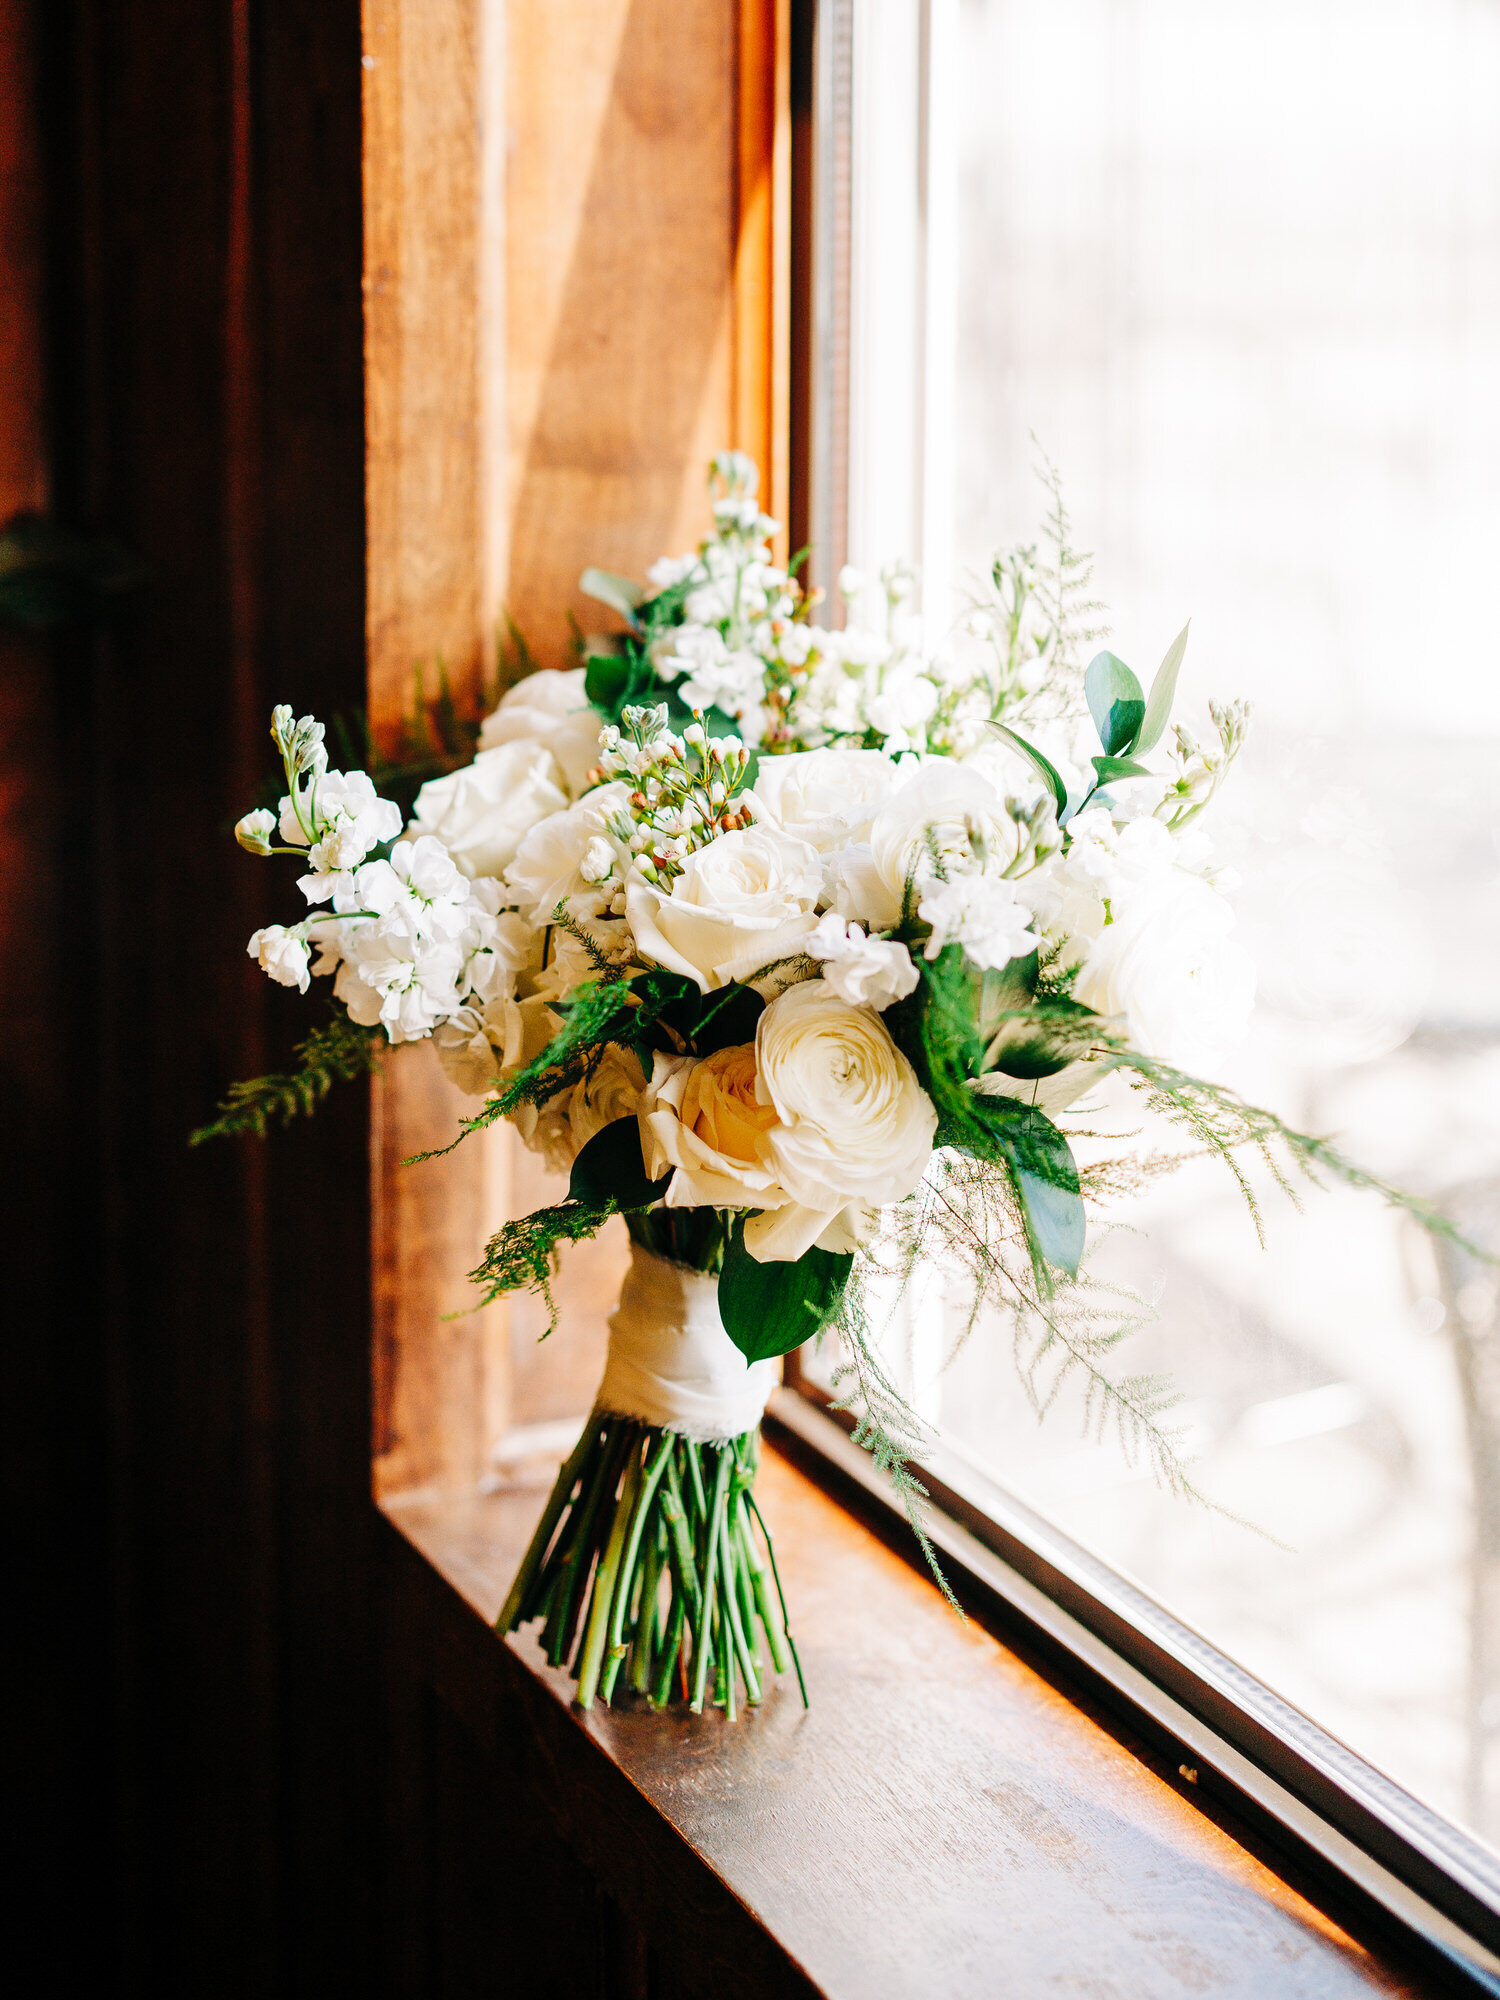 This image, taken by Denver wedding photographer KD Captures, features a white floral bouquet with baby's breath and white roses paired with other greenery. The bouquet is propped up on a windowsill.